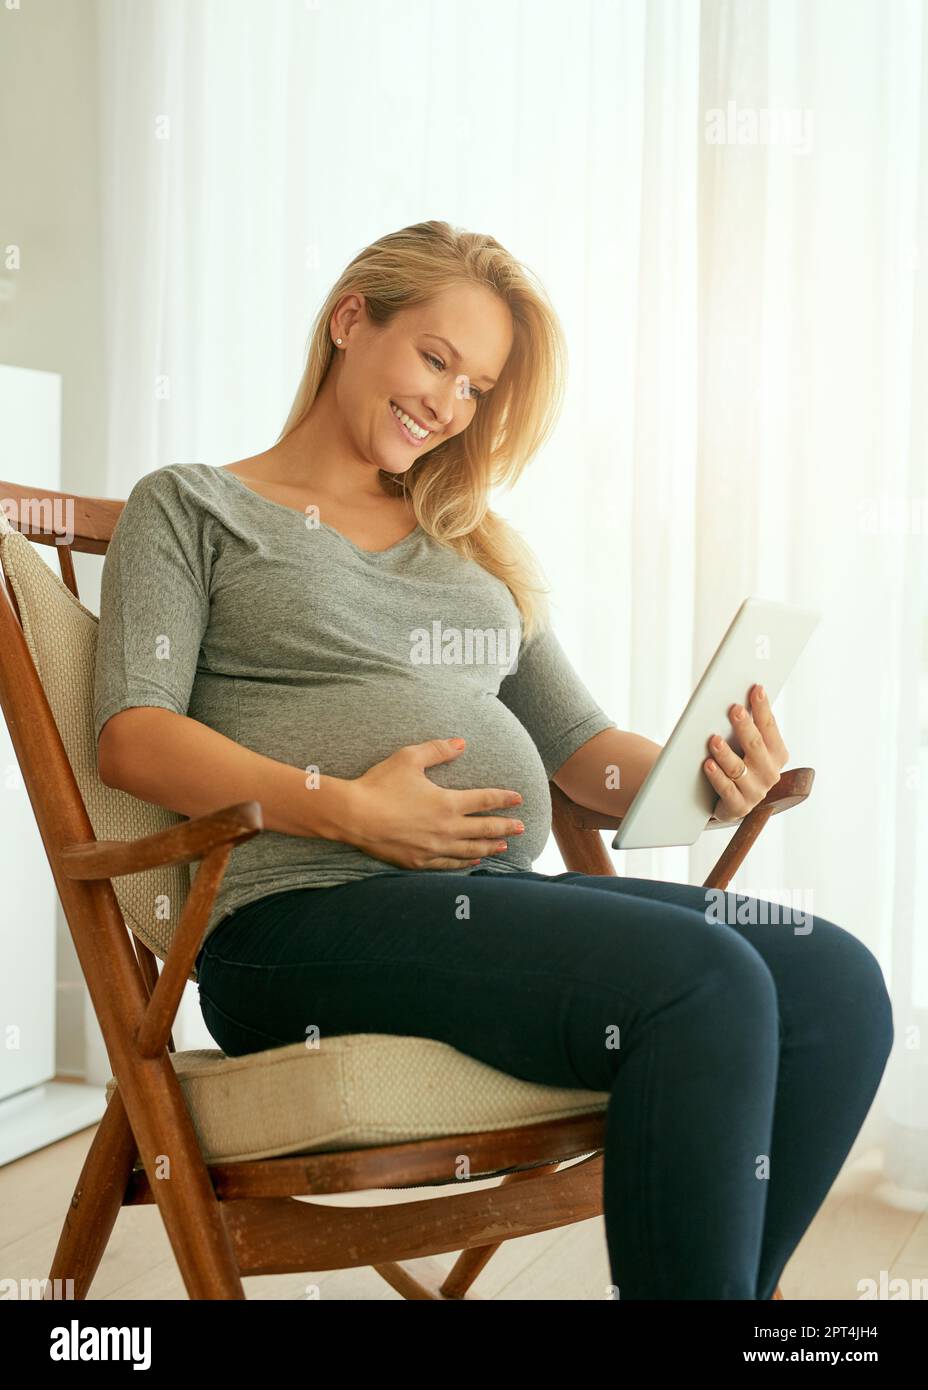 Creating my own pregnancy slideshow. a pregnant woman using her digital tablet while sitting on a rocking chair Stock Photo